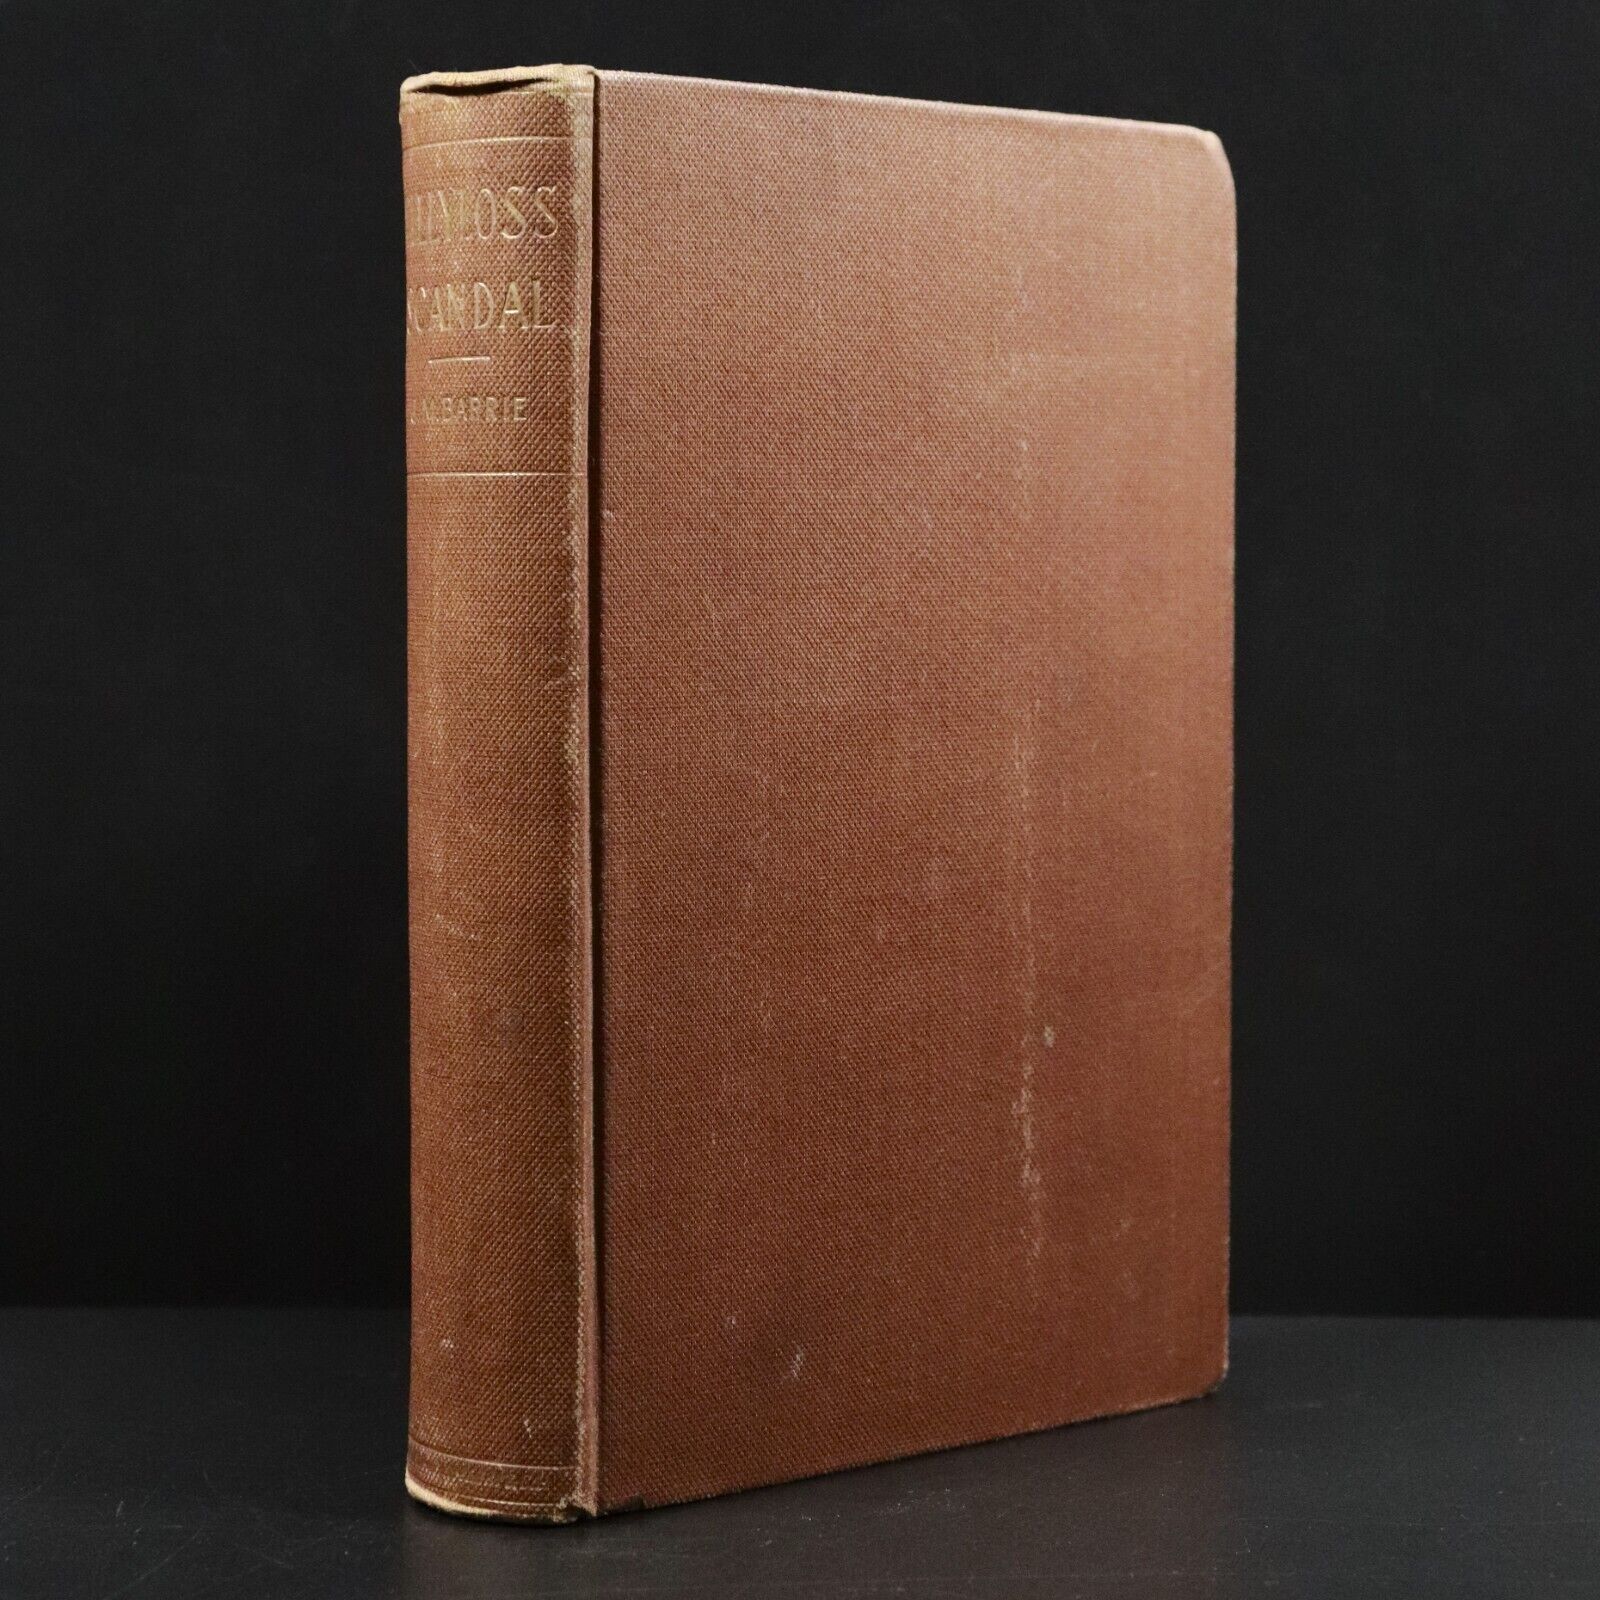 c1893 The Tillyloss Scandal by J.M. Barrie Antique Fiction Book